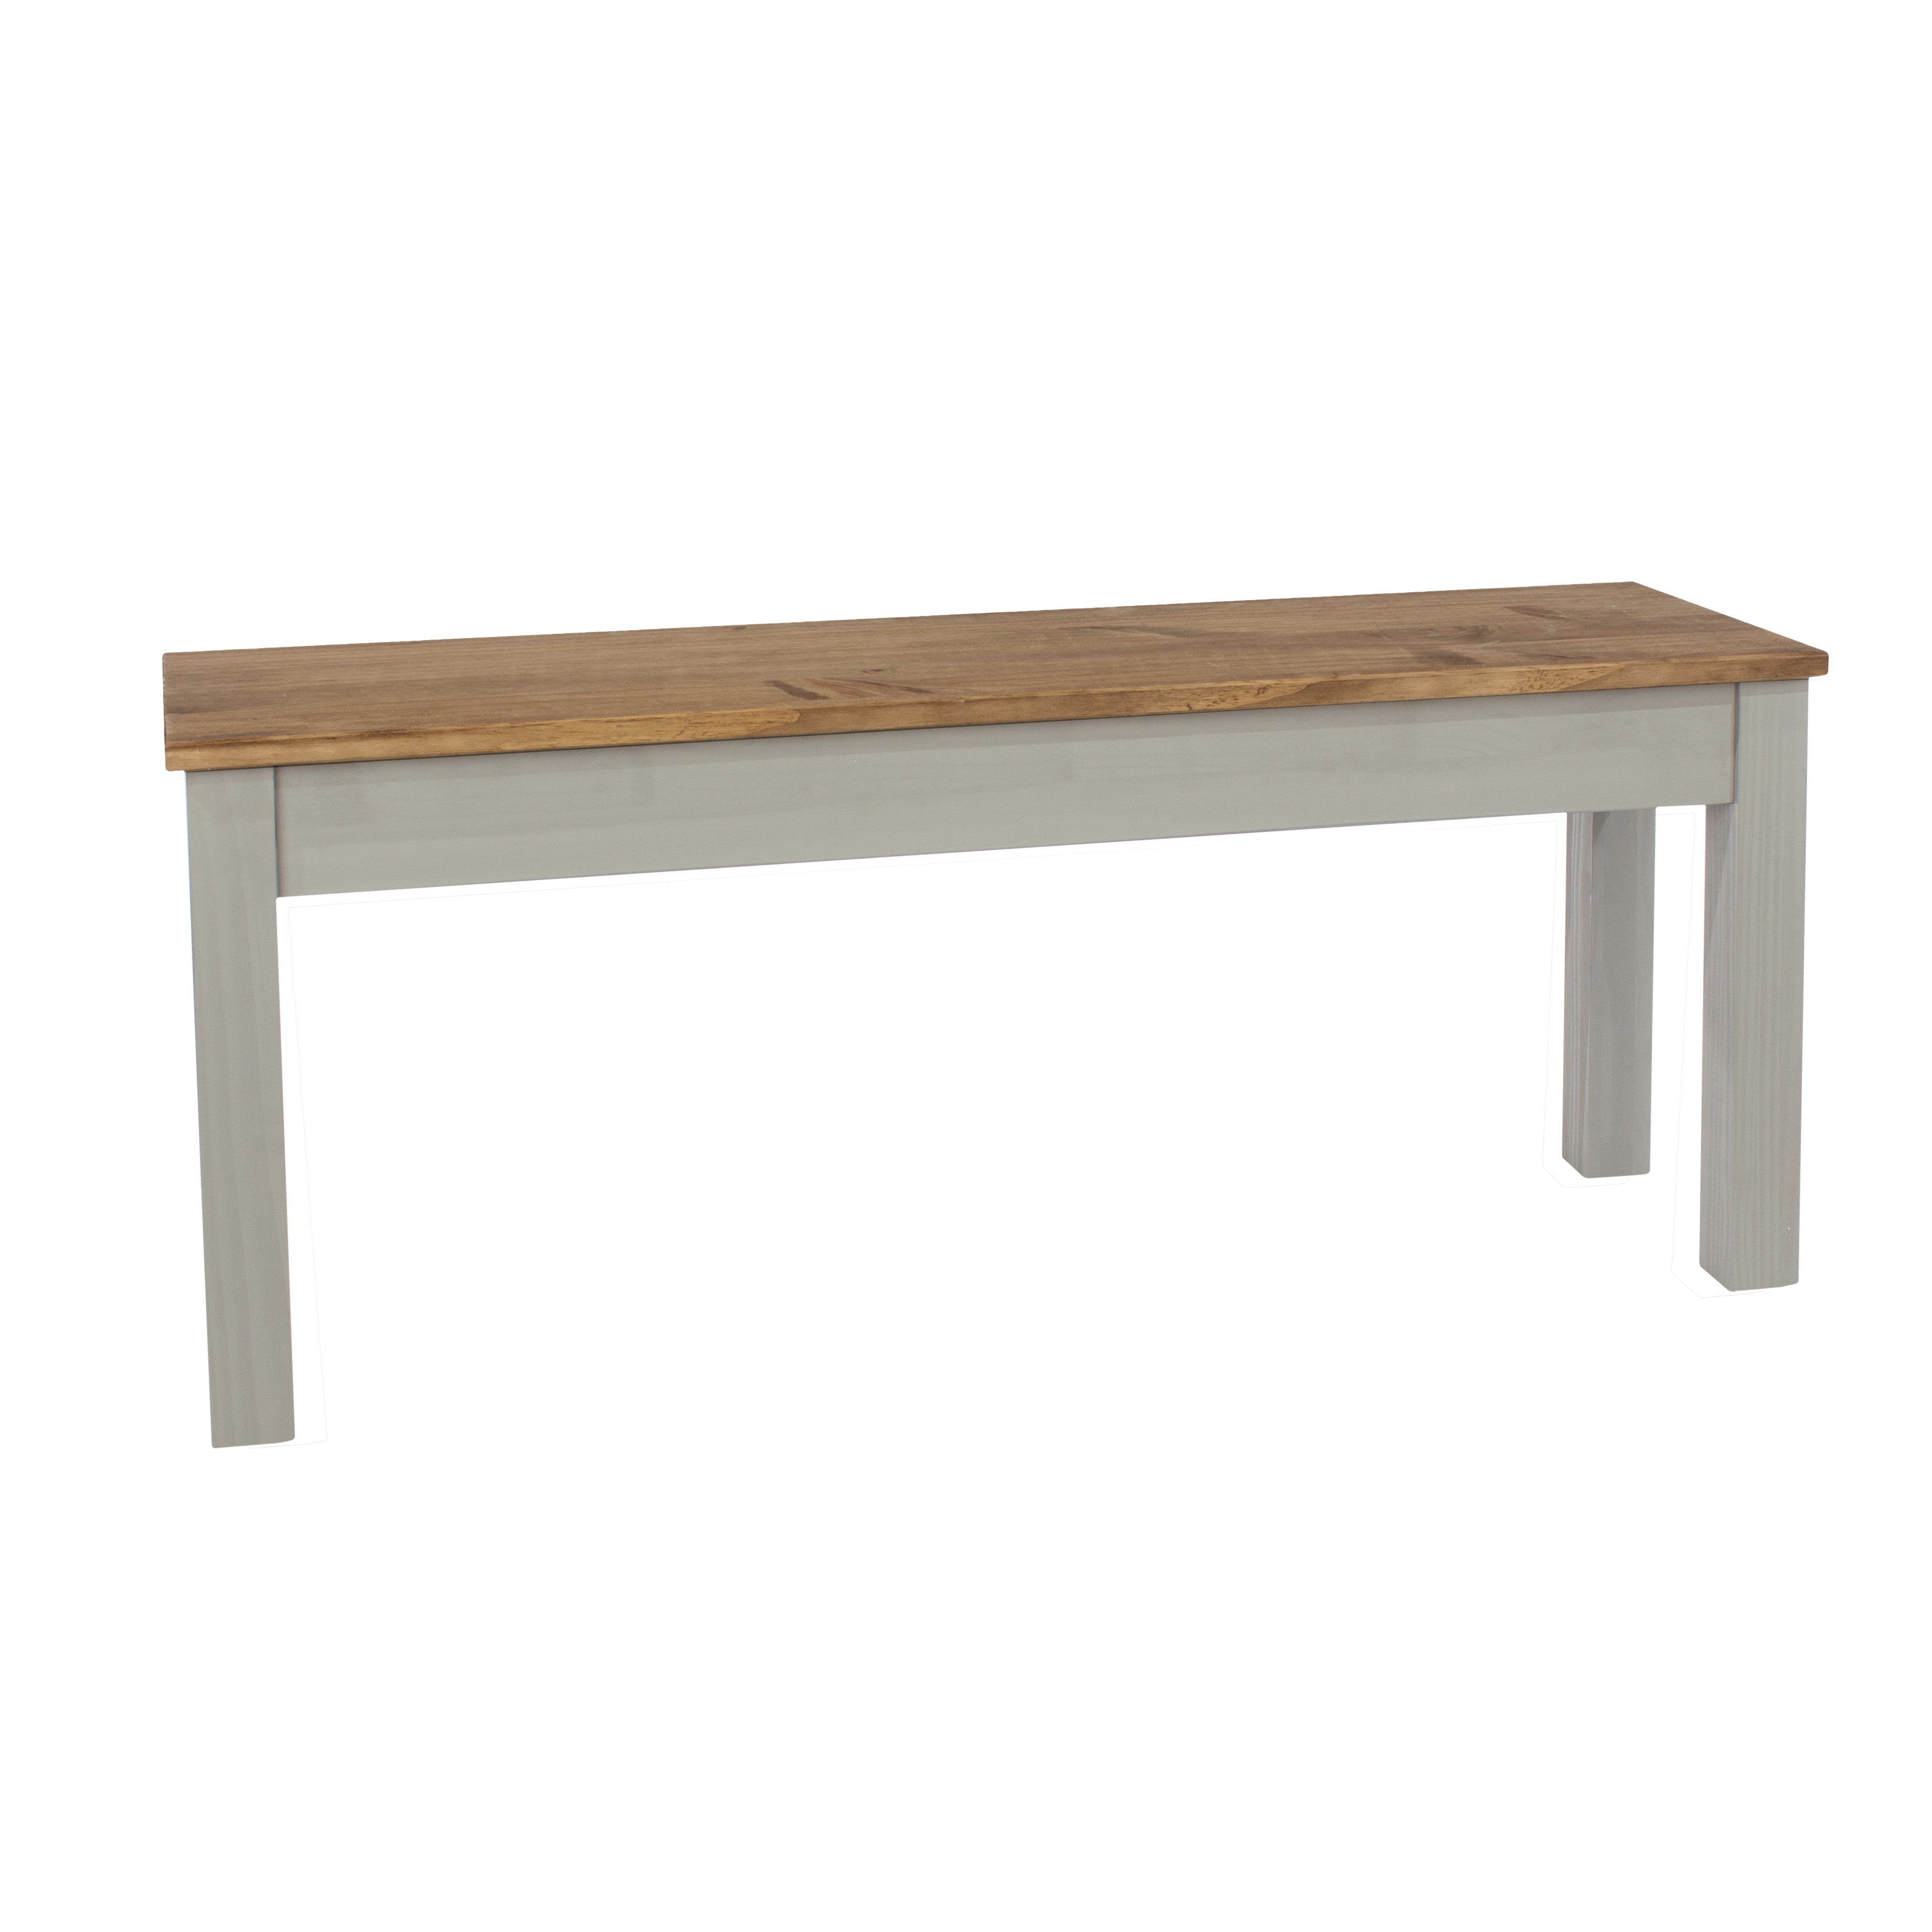 Linea Bench For 1200Mm Table